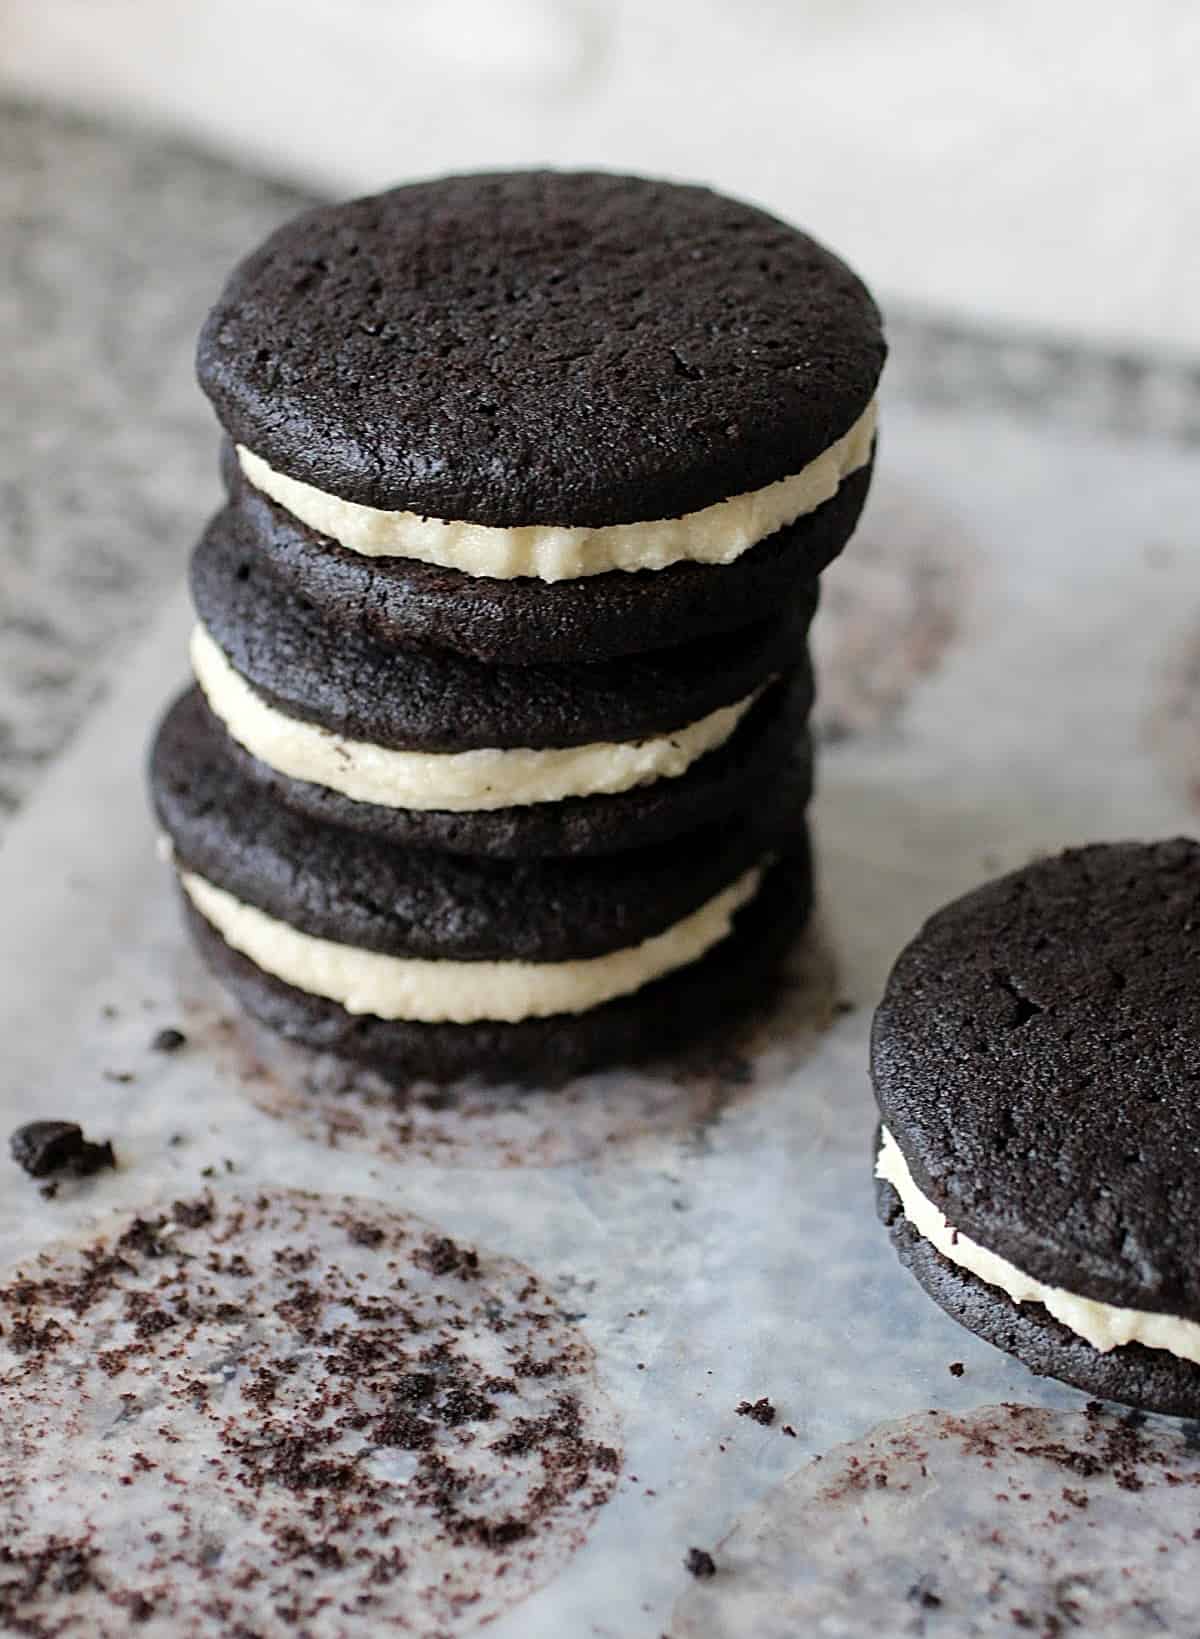 Grey surface with a stack of three filled chocolate cookies, partial view of another cookie